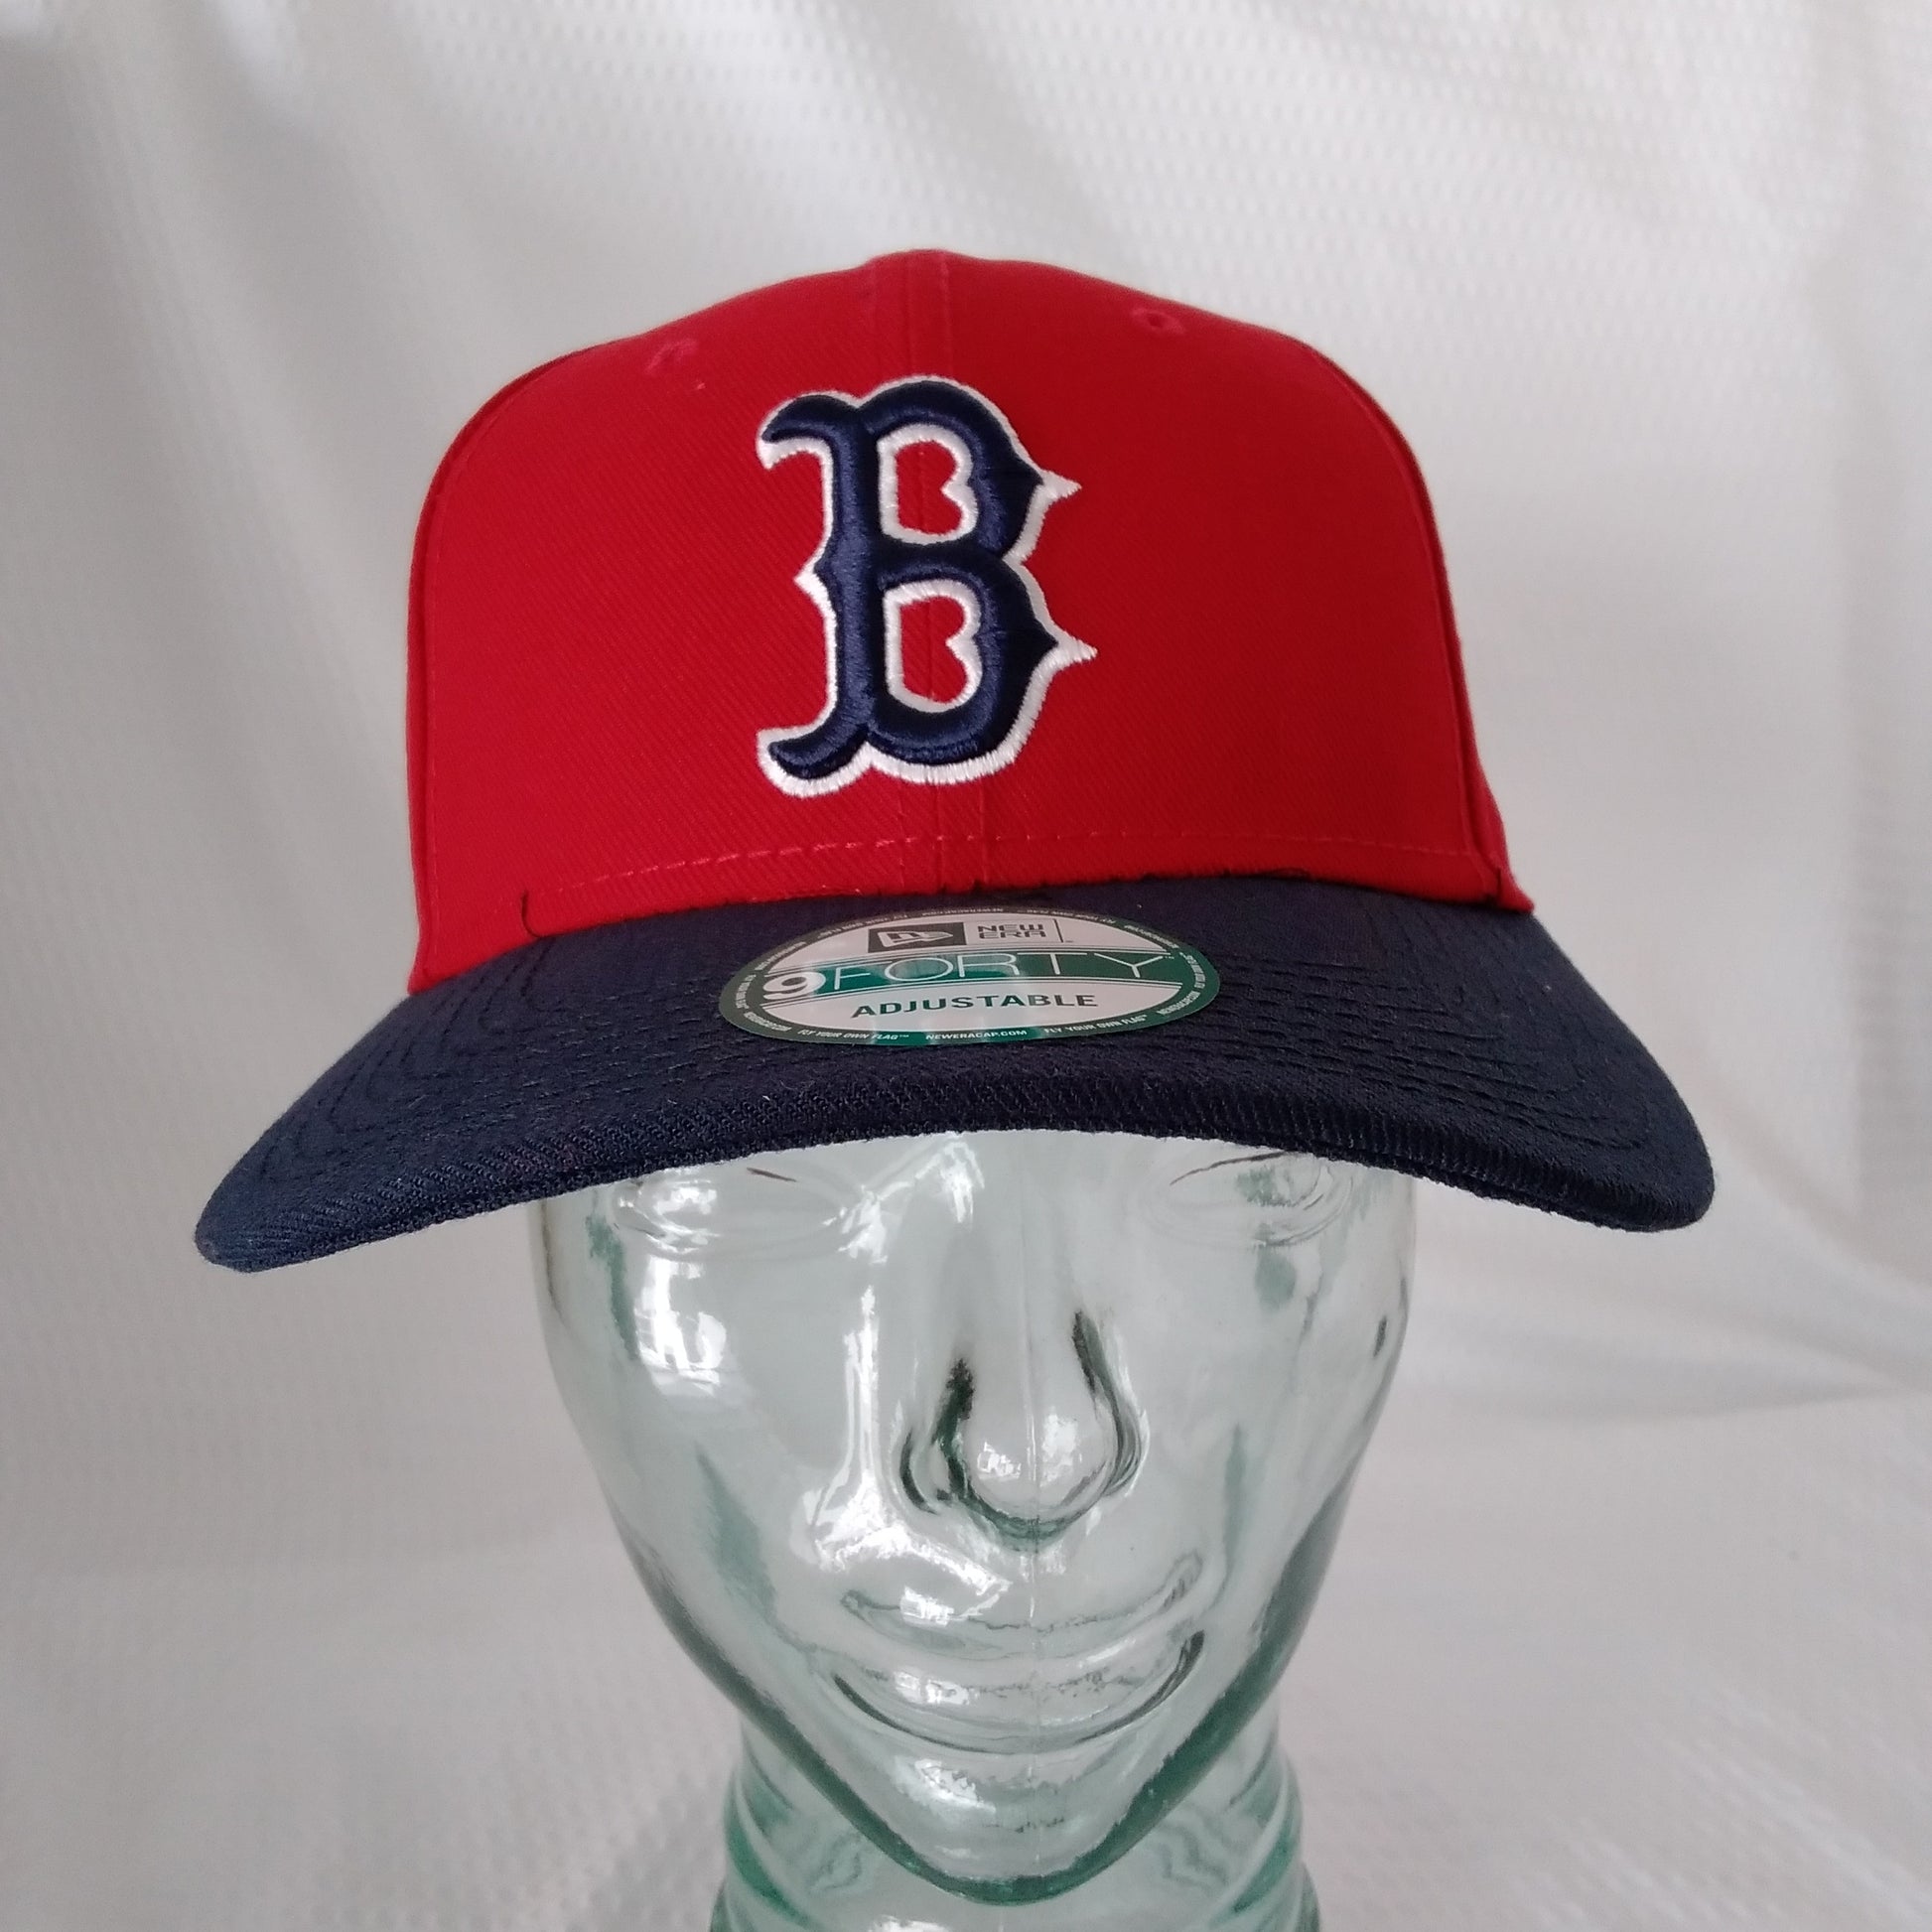 boston red sox store online